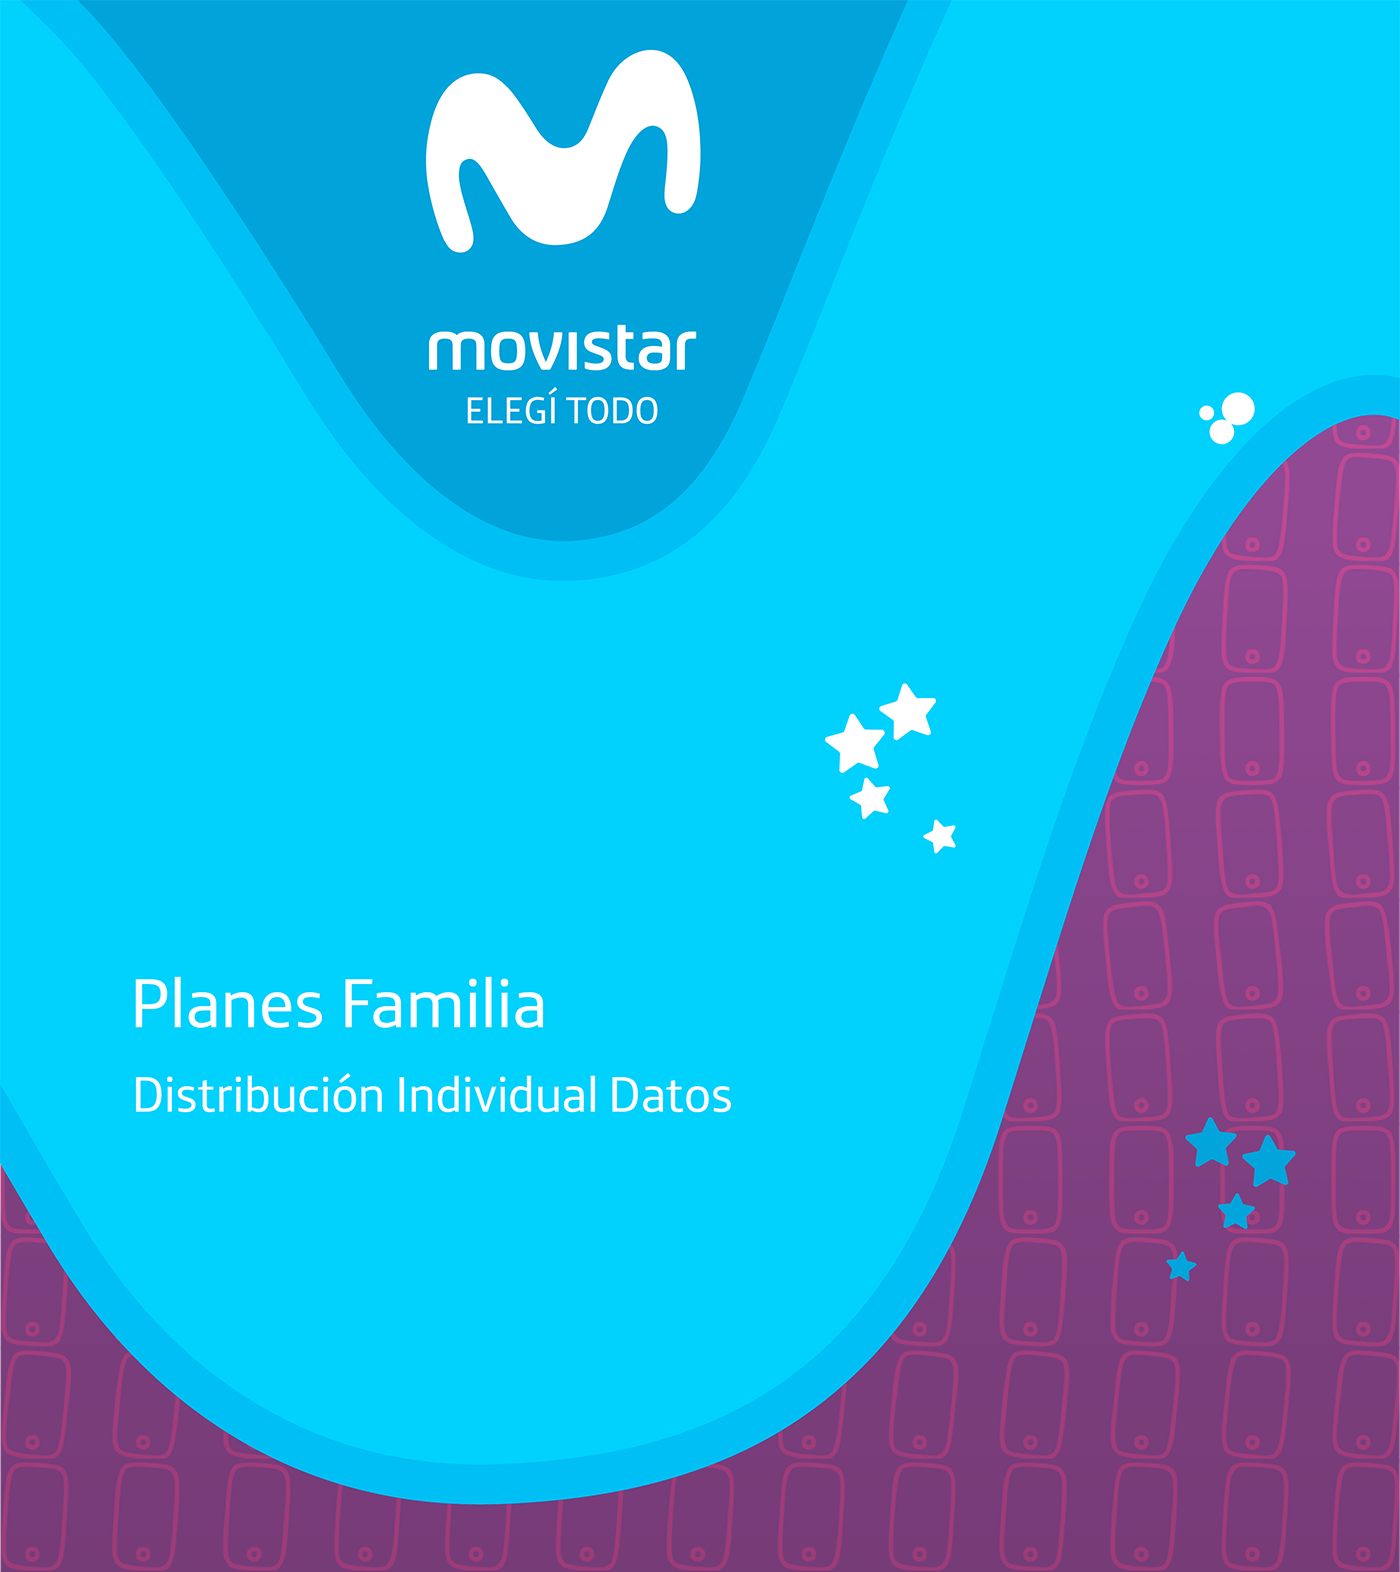 animacion after effects motiongraphics marcas movistar